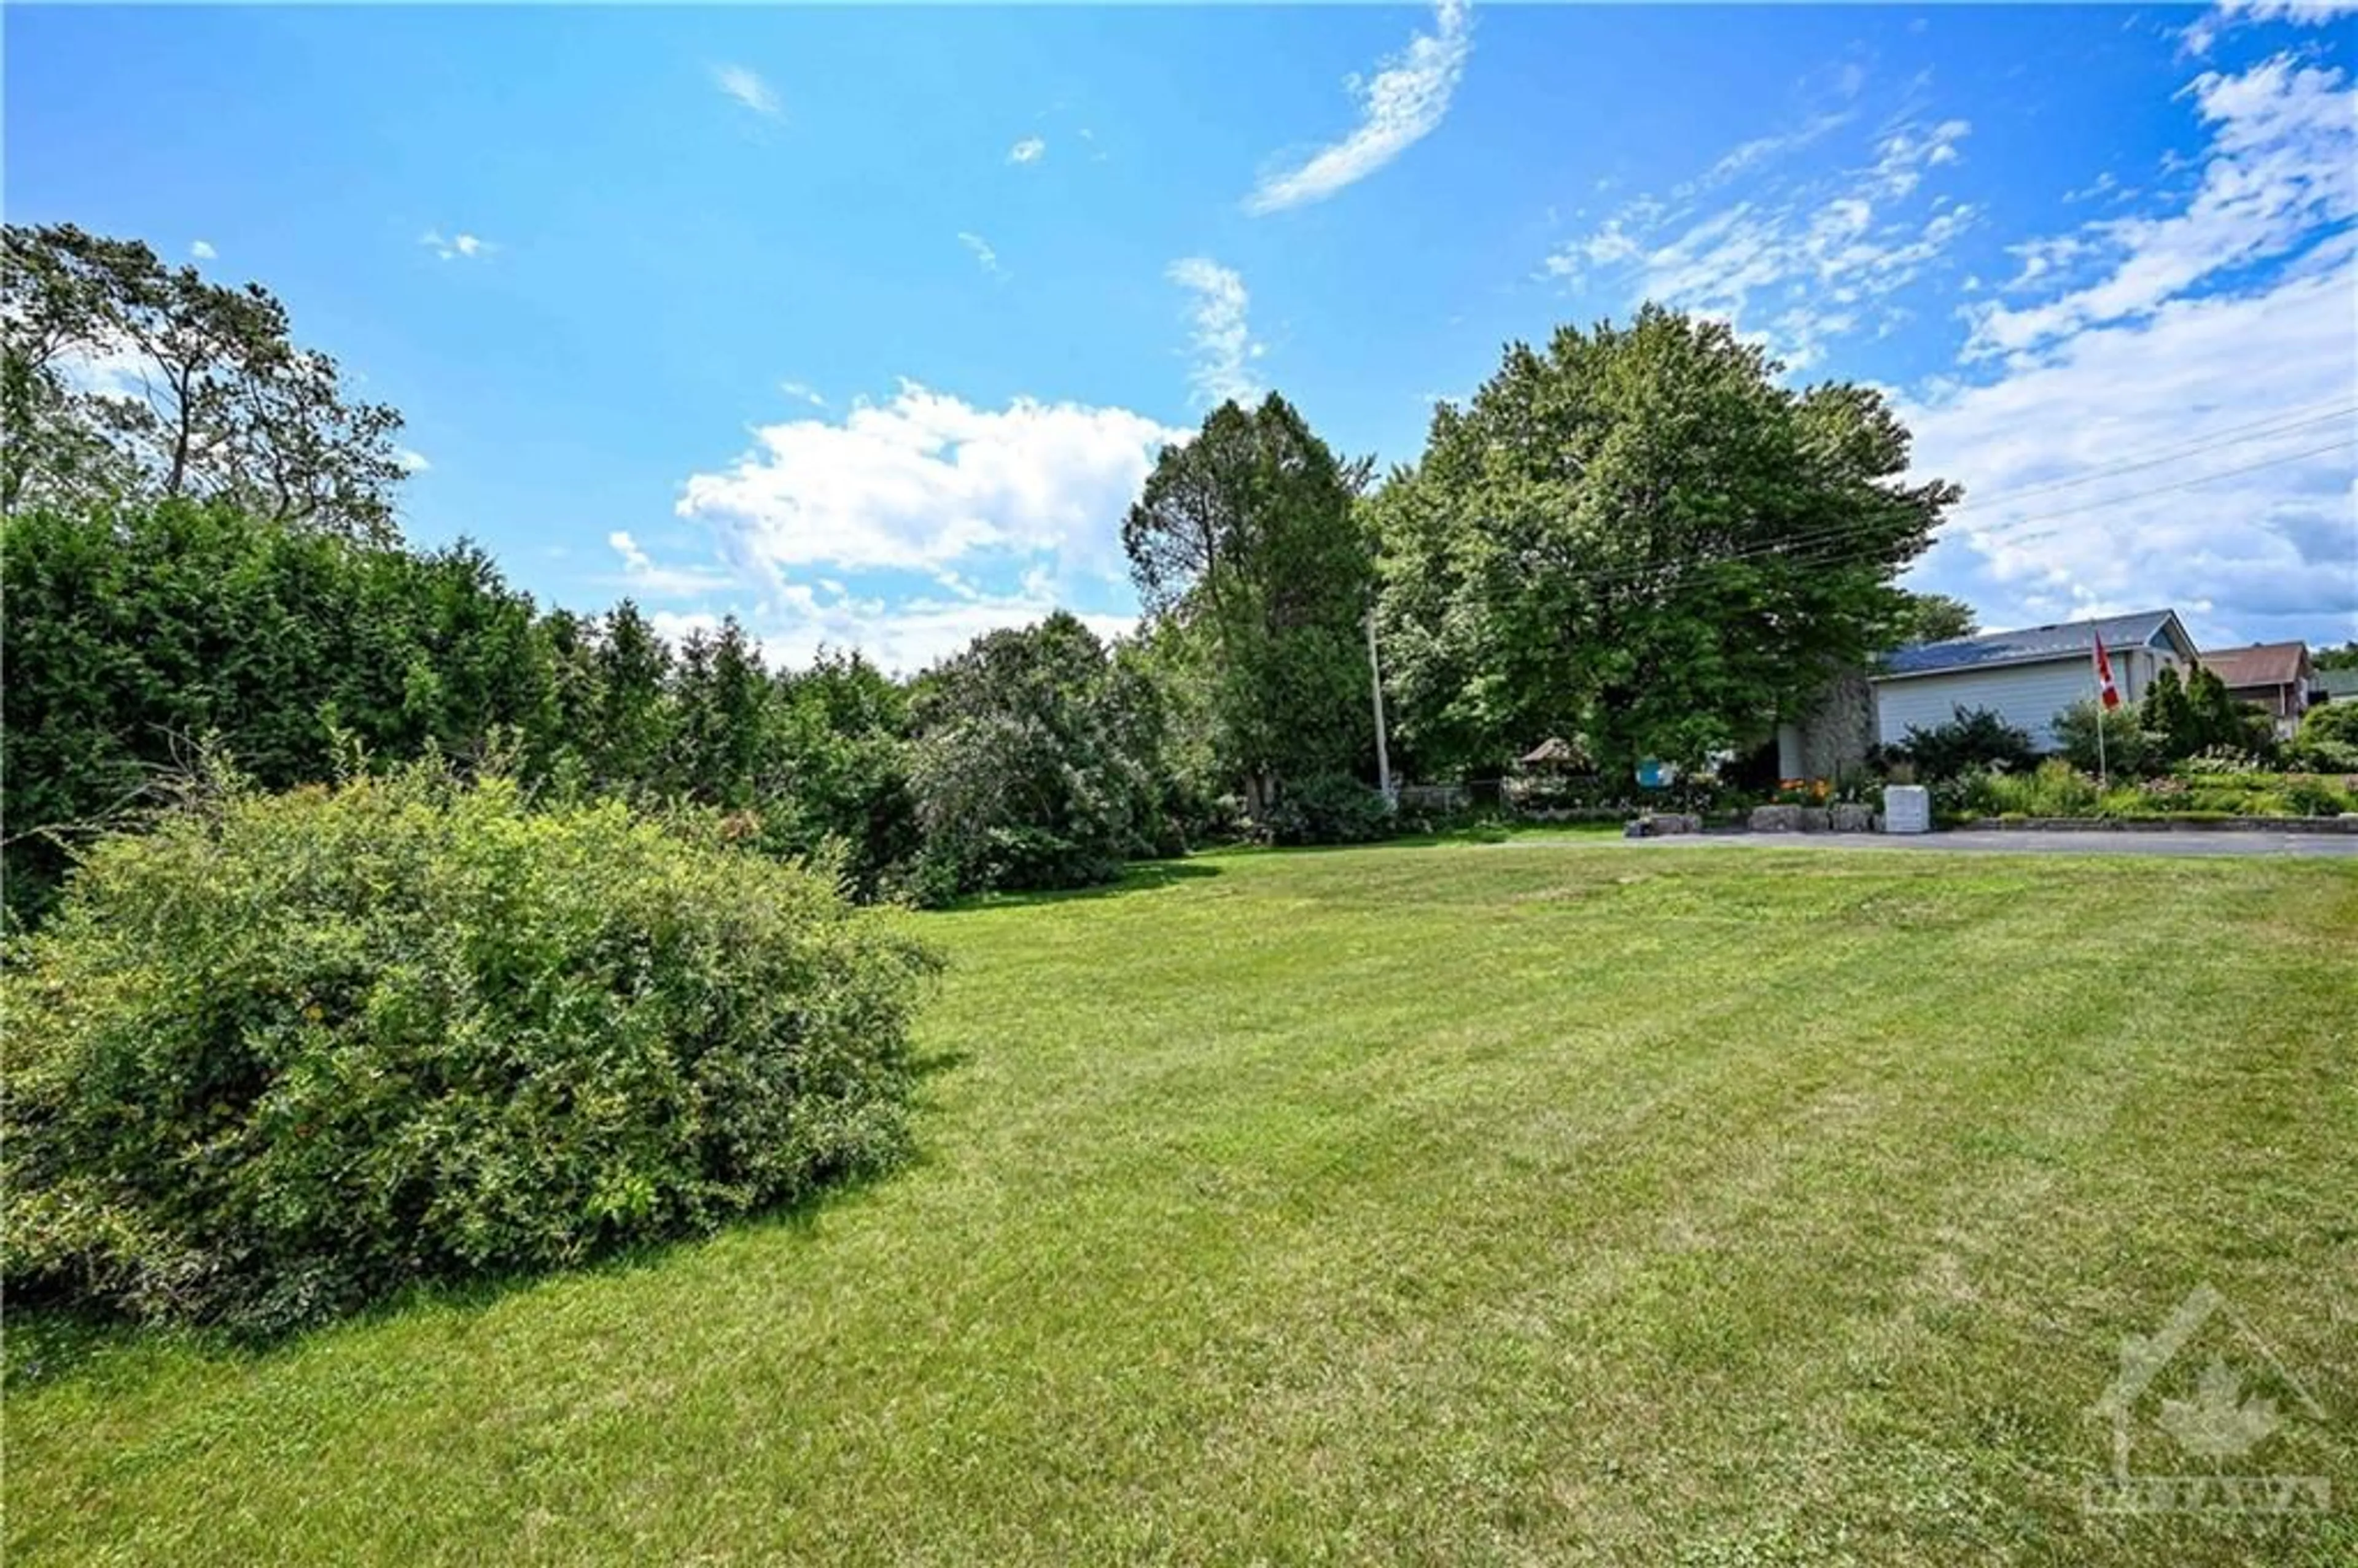 Fenced yard for 220 CASTOR St, Russell Ontario K4R 1E1